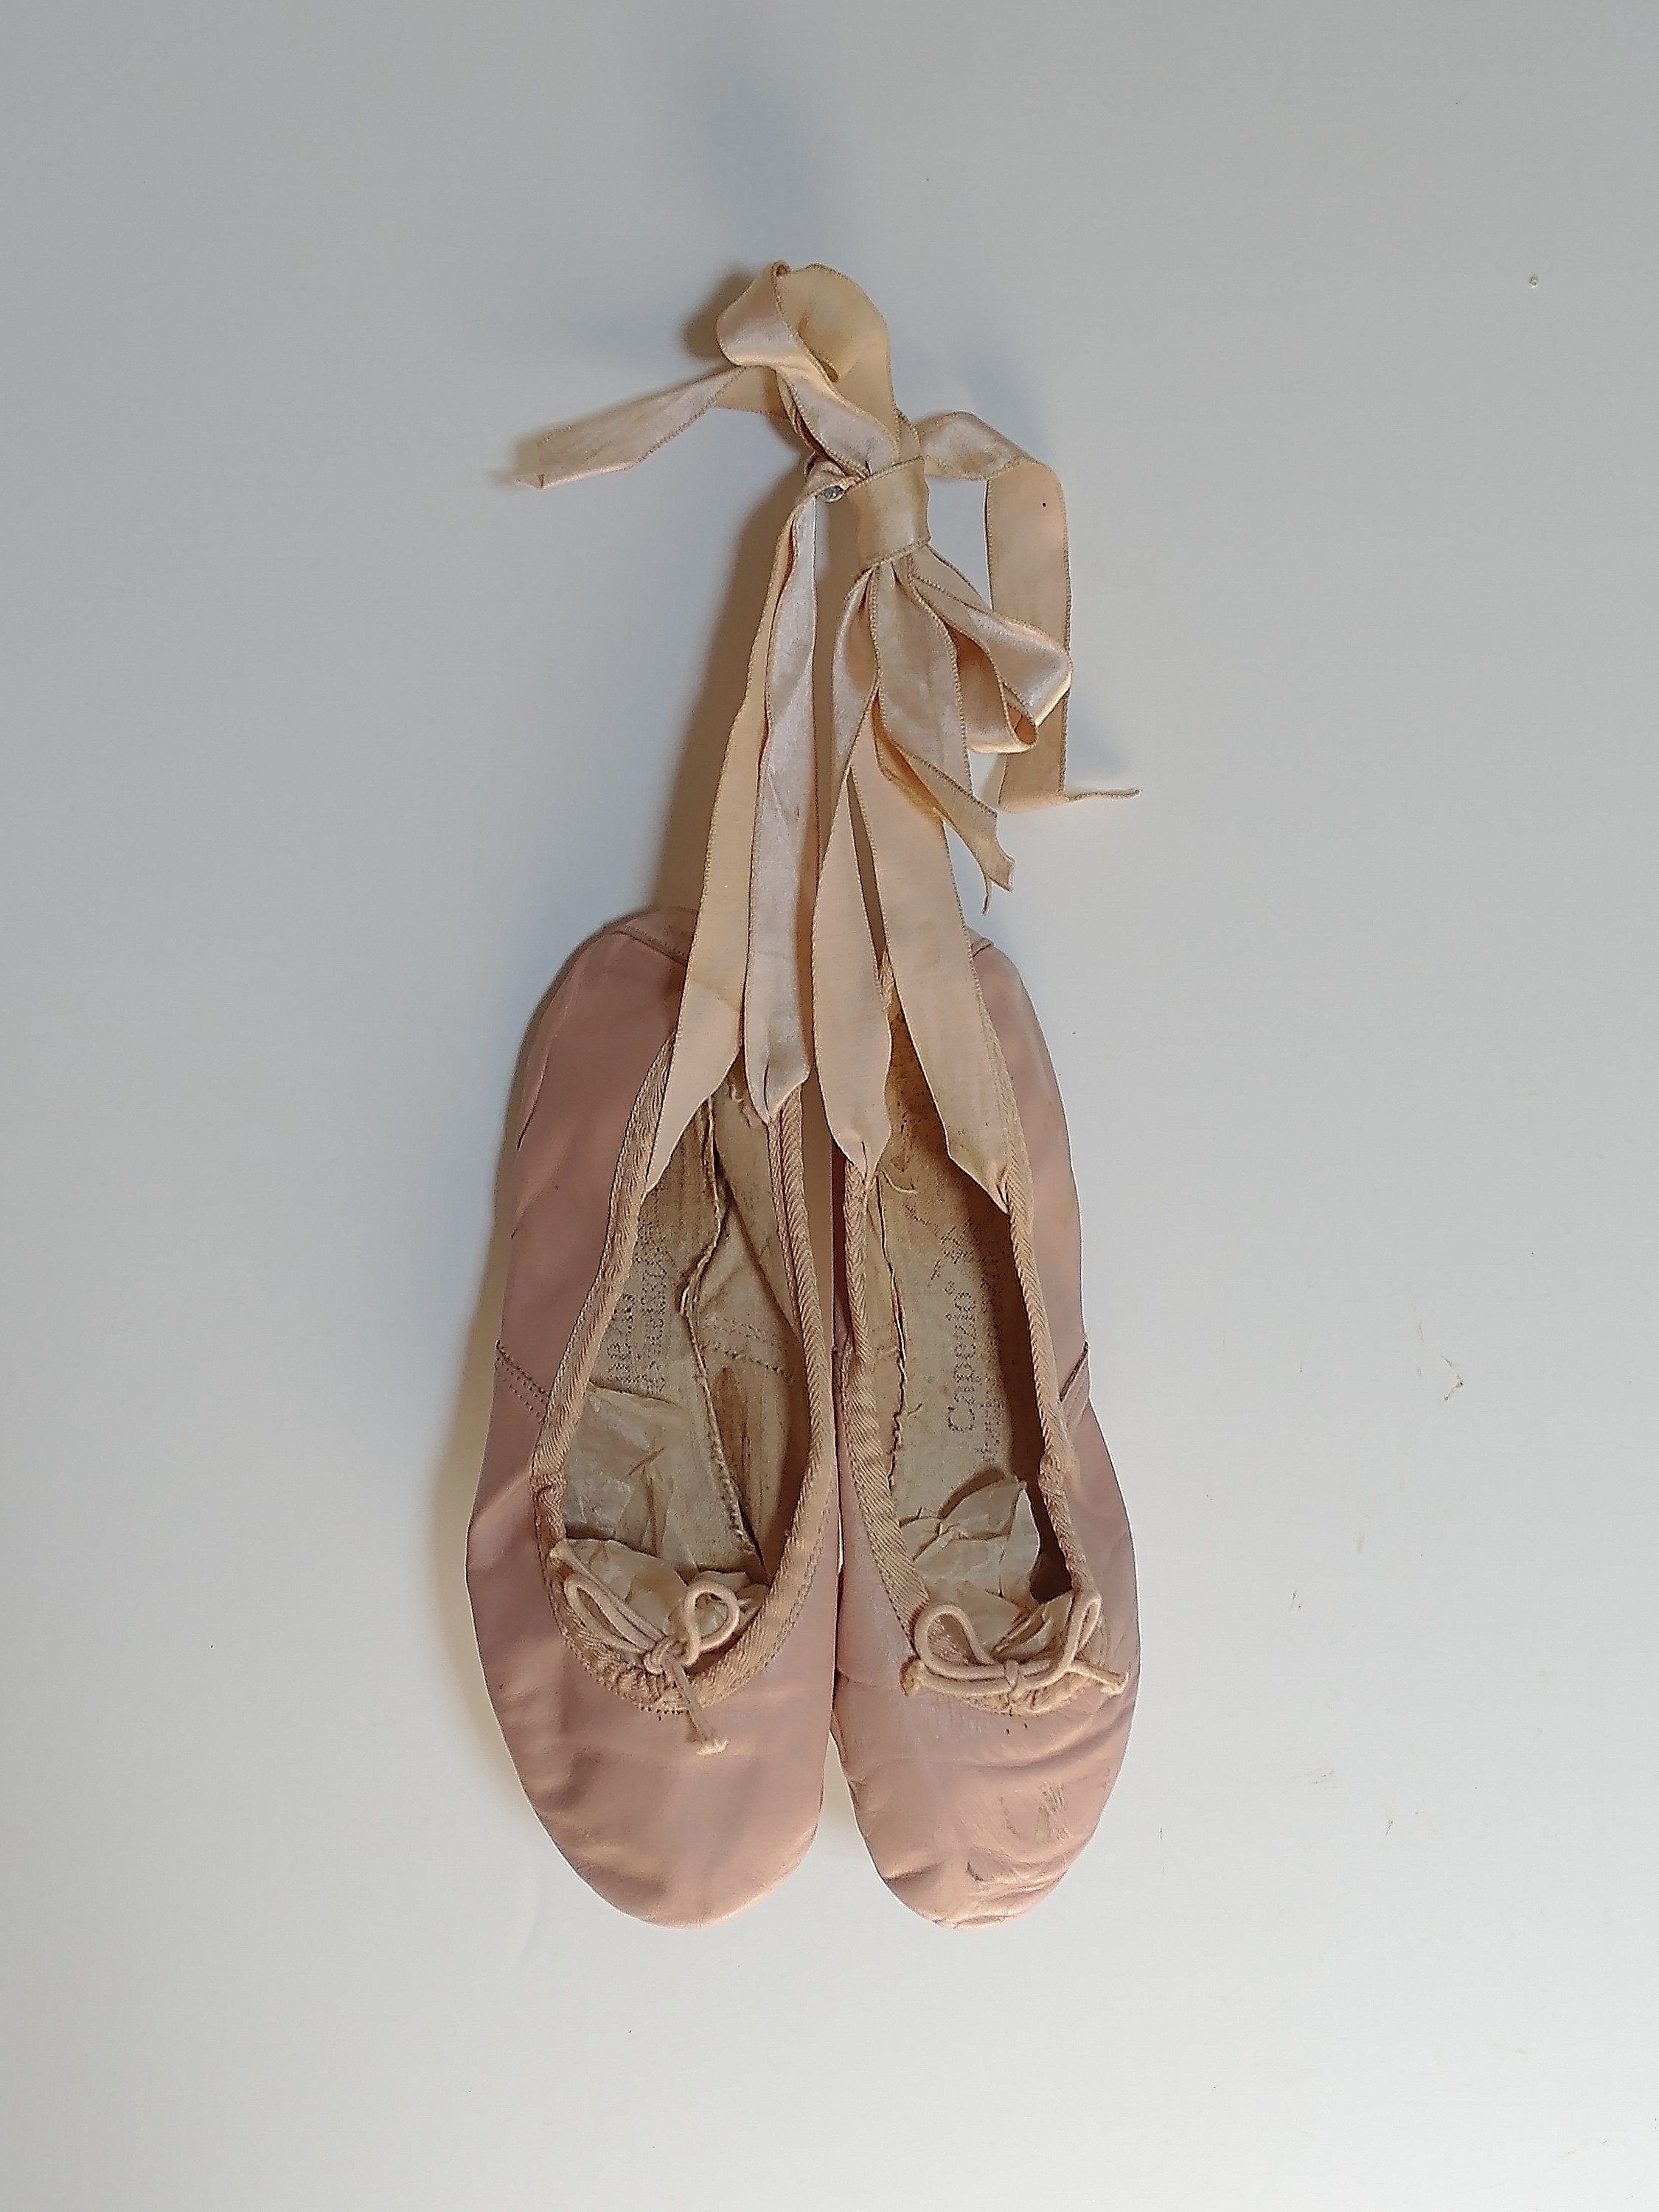 Vintage Pink Leather Ballerina Dance Slippers Shoes - Etsy